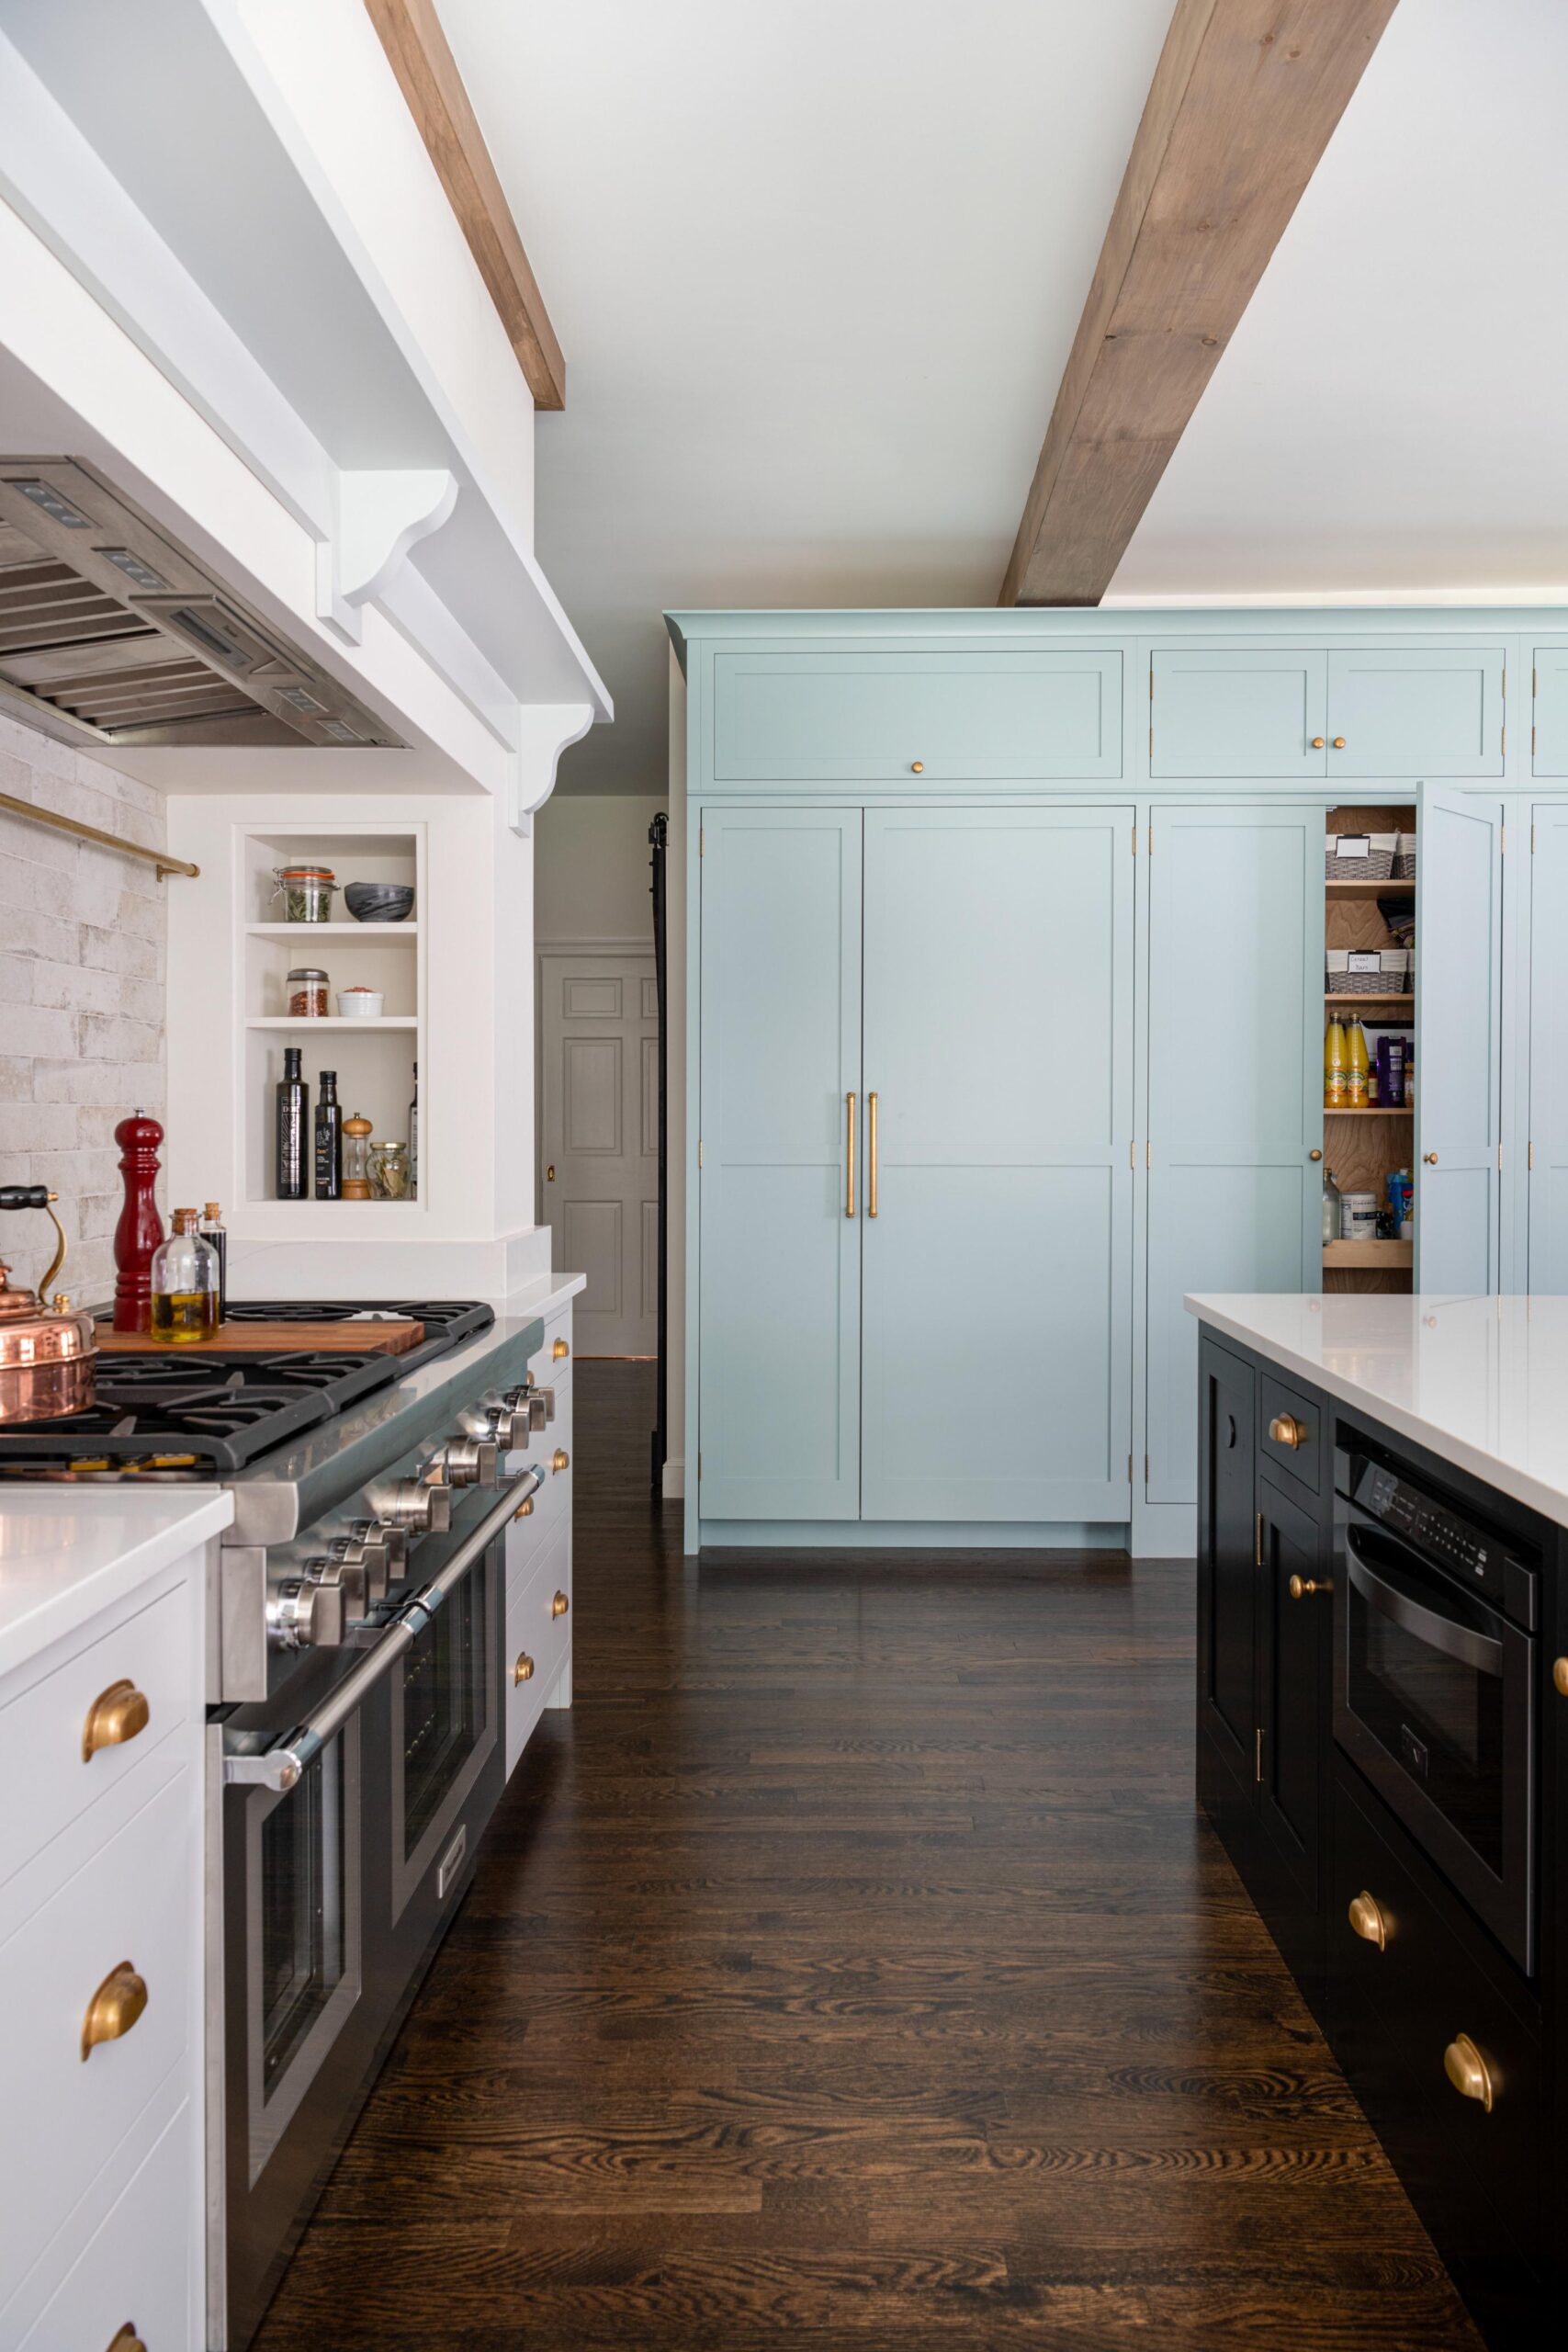 Kitchen with black and white cabinets and wooden floor. It has a huge light blue cabinets that functions as the pantry.